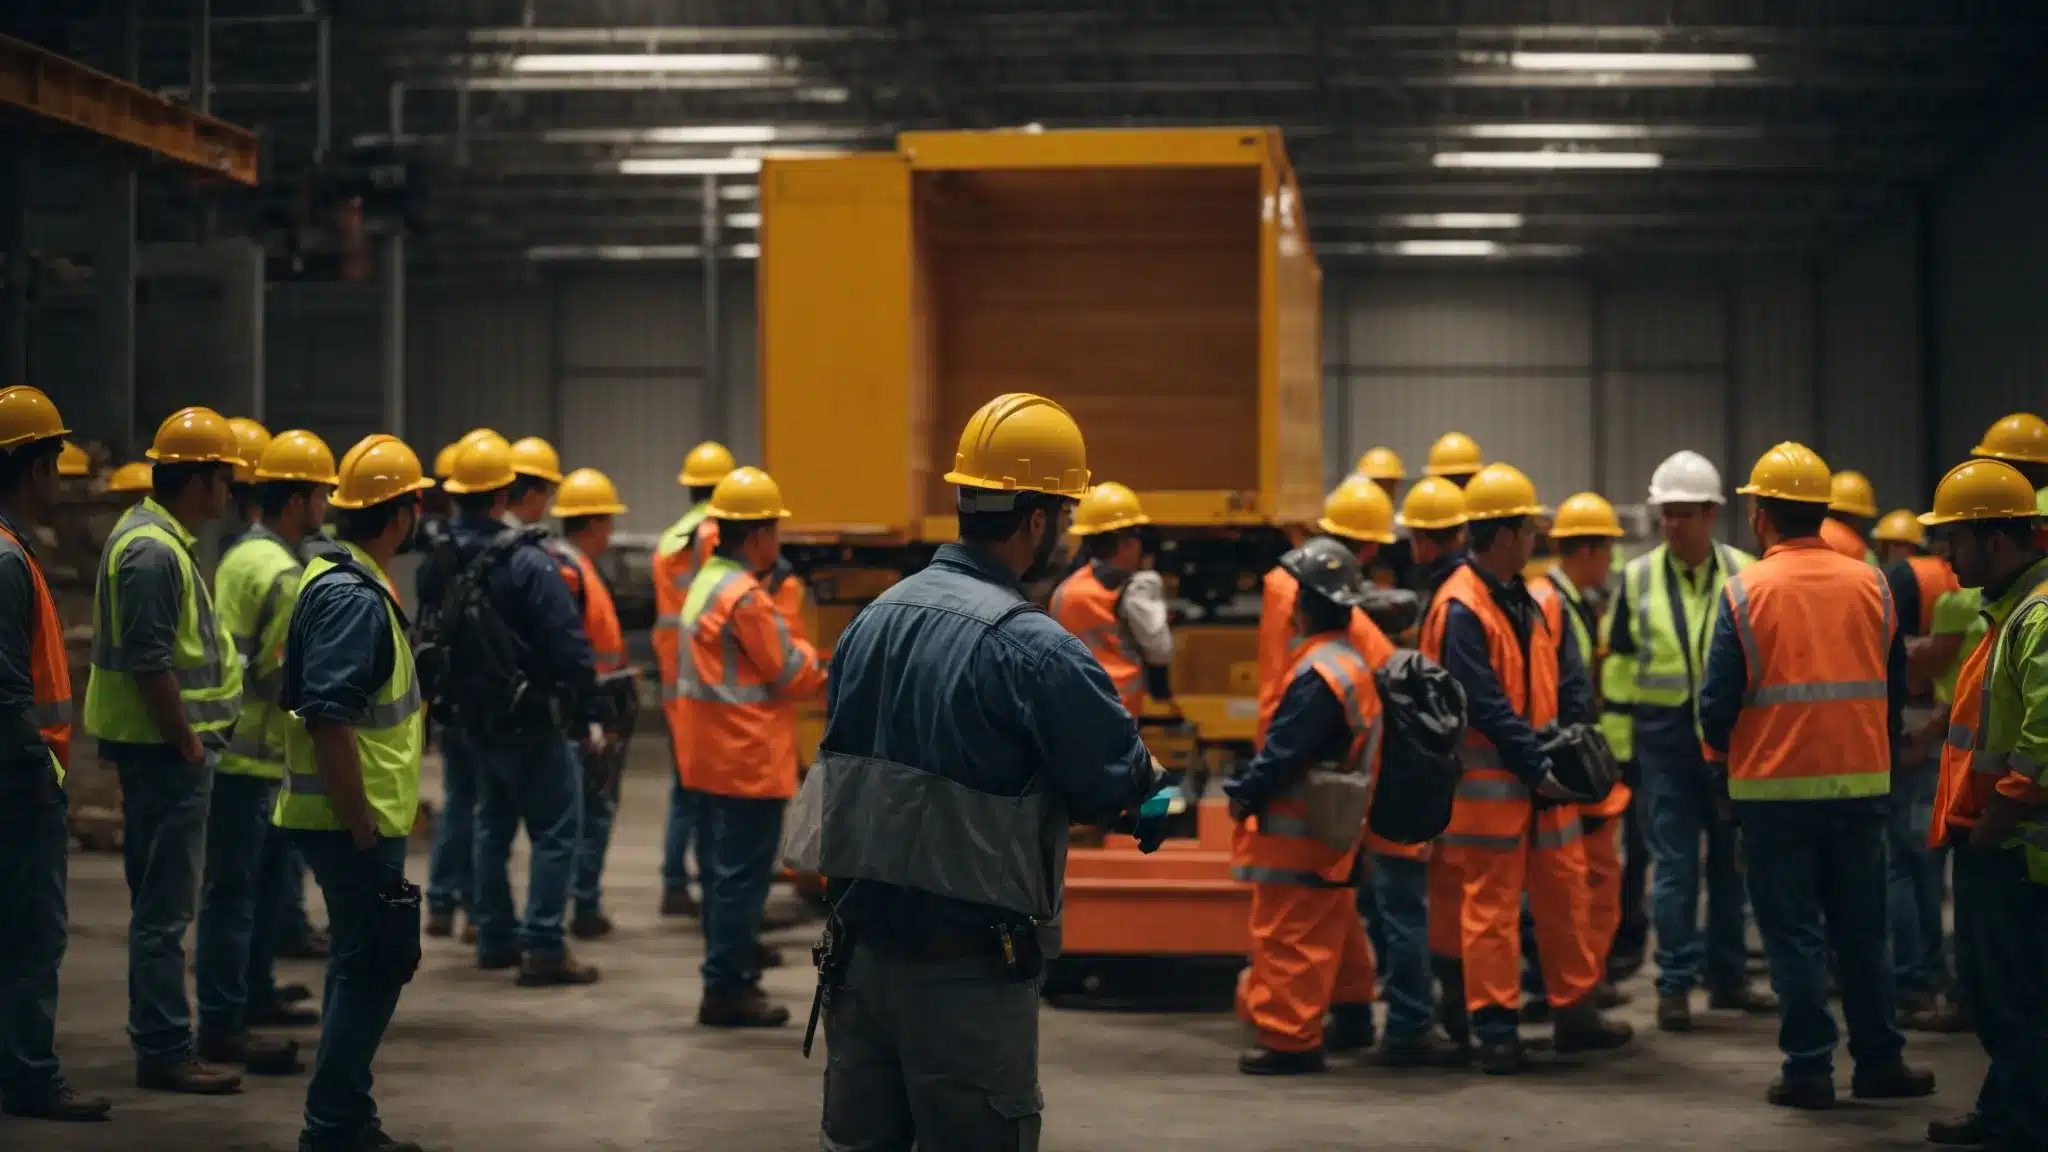 Workers Wearing Hard Hats And Safety Vests Are Attending A Demonstration On The Correct Way To Lift Heavy Objects In A Warehouse.